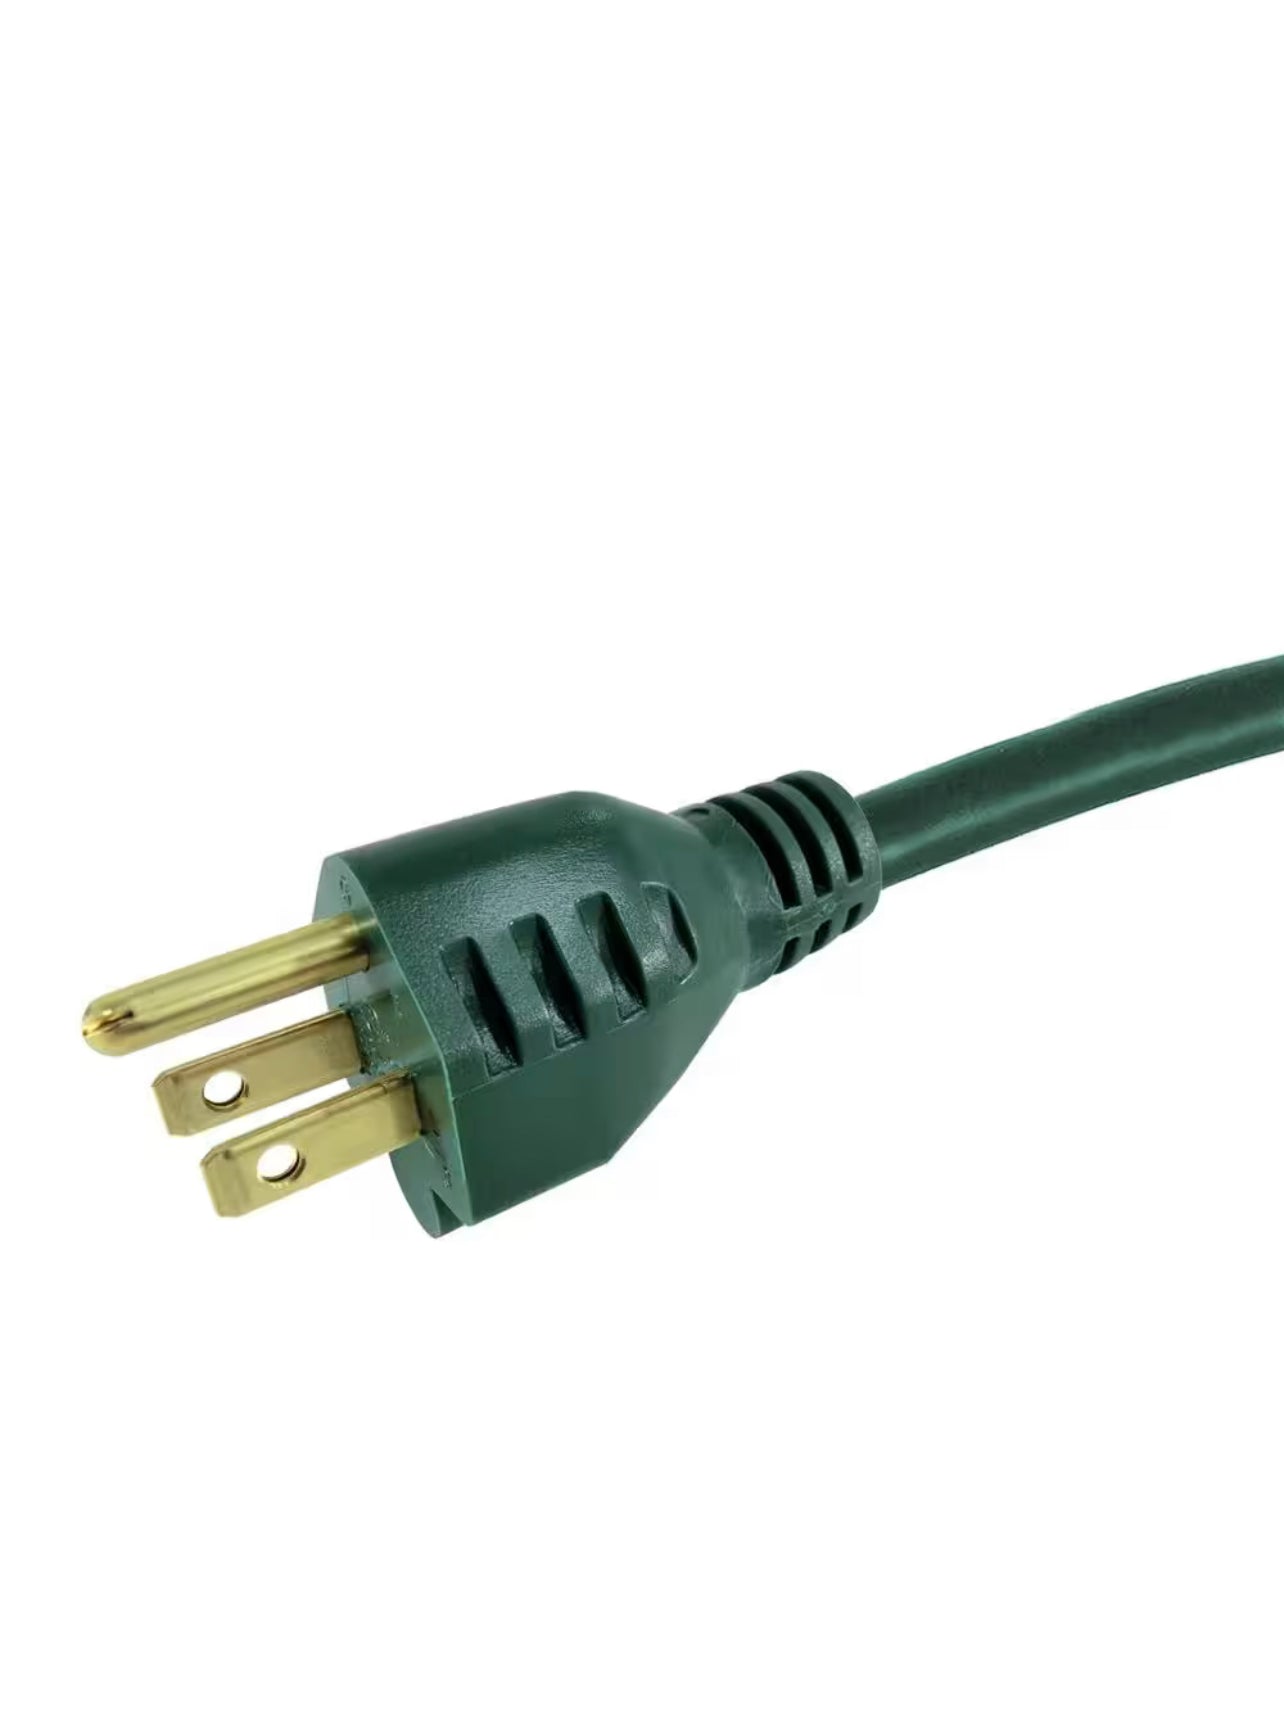 HDX 40 ft Multi Directional Outdoor Extension Cord Damaged Box